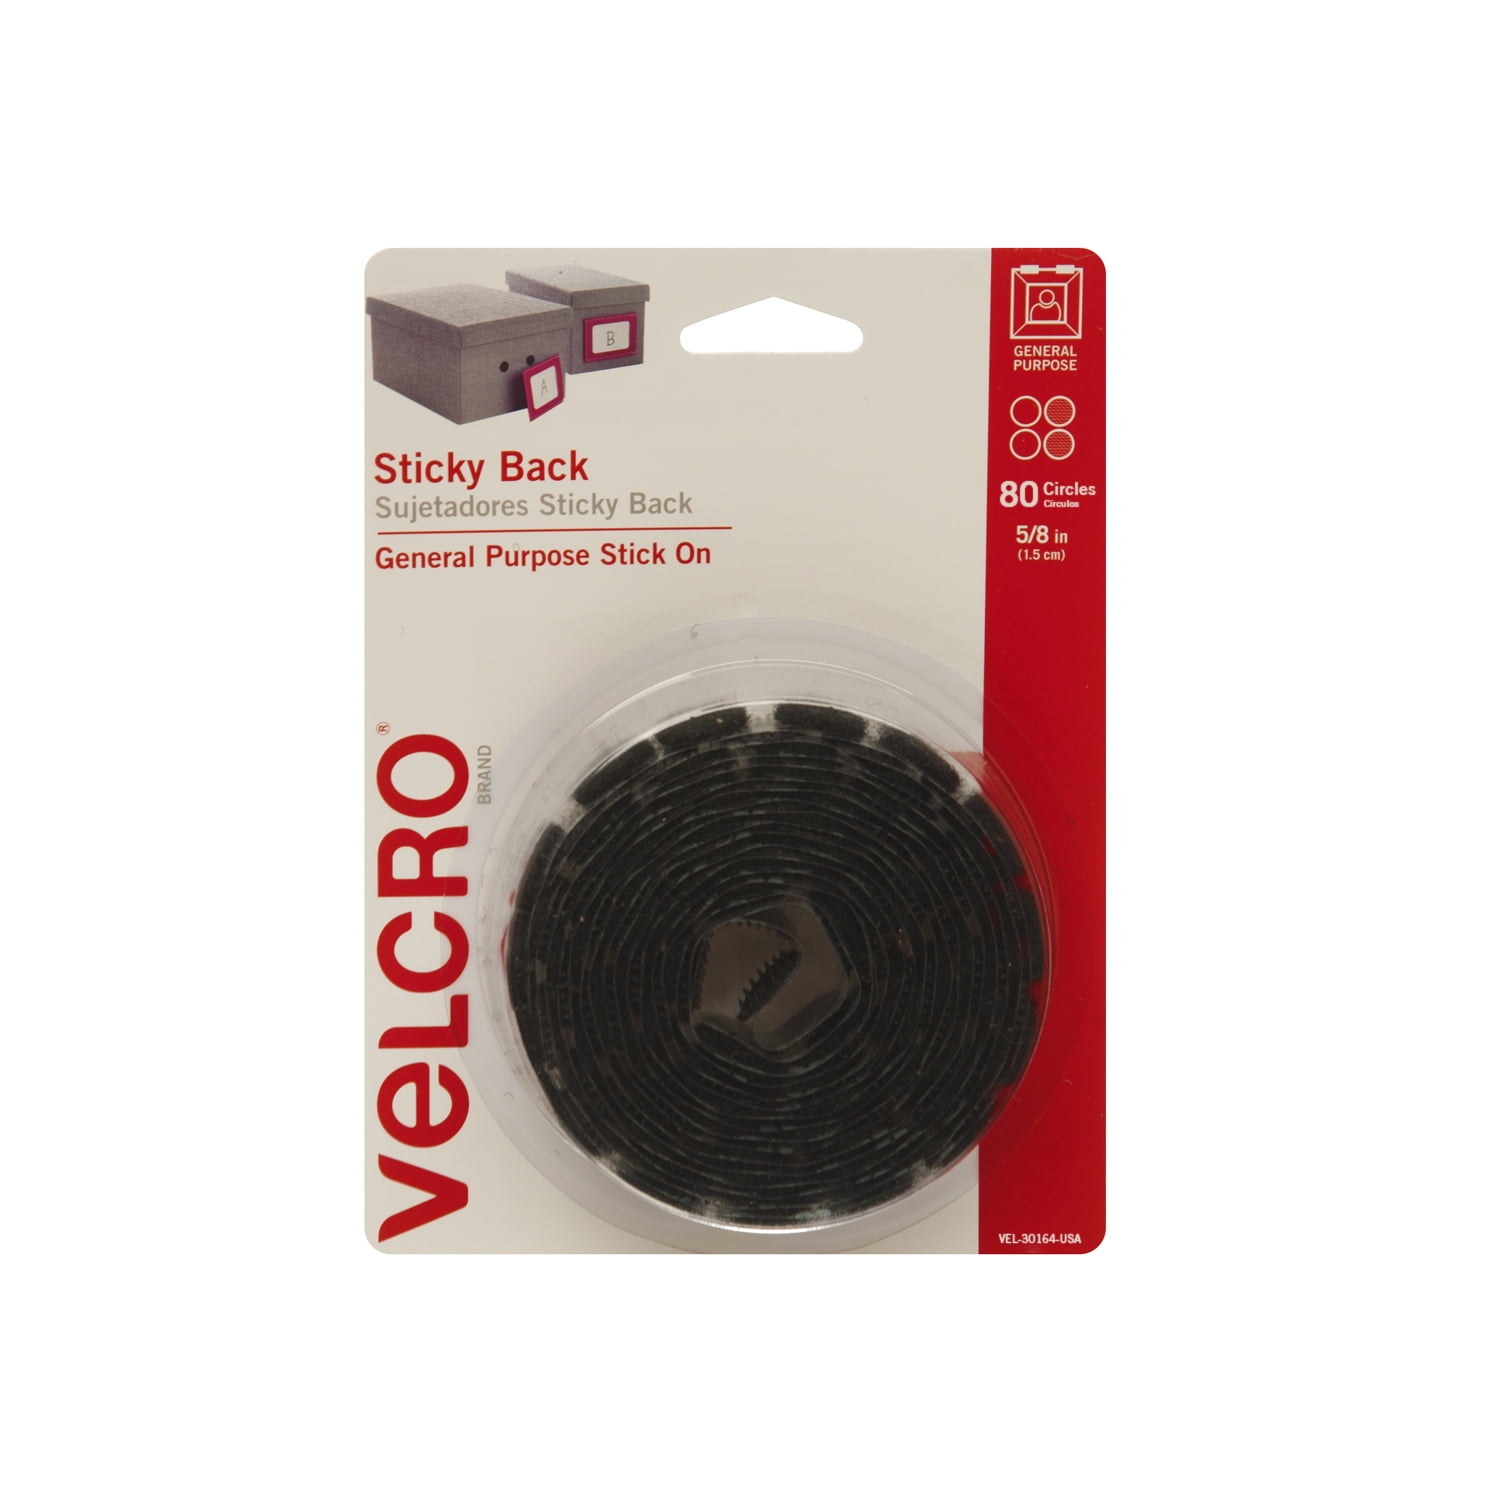 VELCRO Brand - Sticky Back Hook and Loop Fasteners | Perfect for Home or Office | 5/8in Coins | Pack of 80 | Black